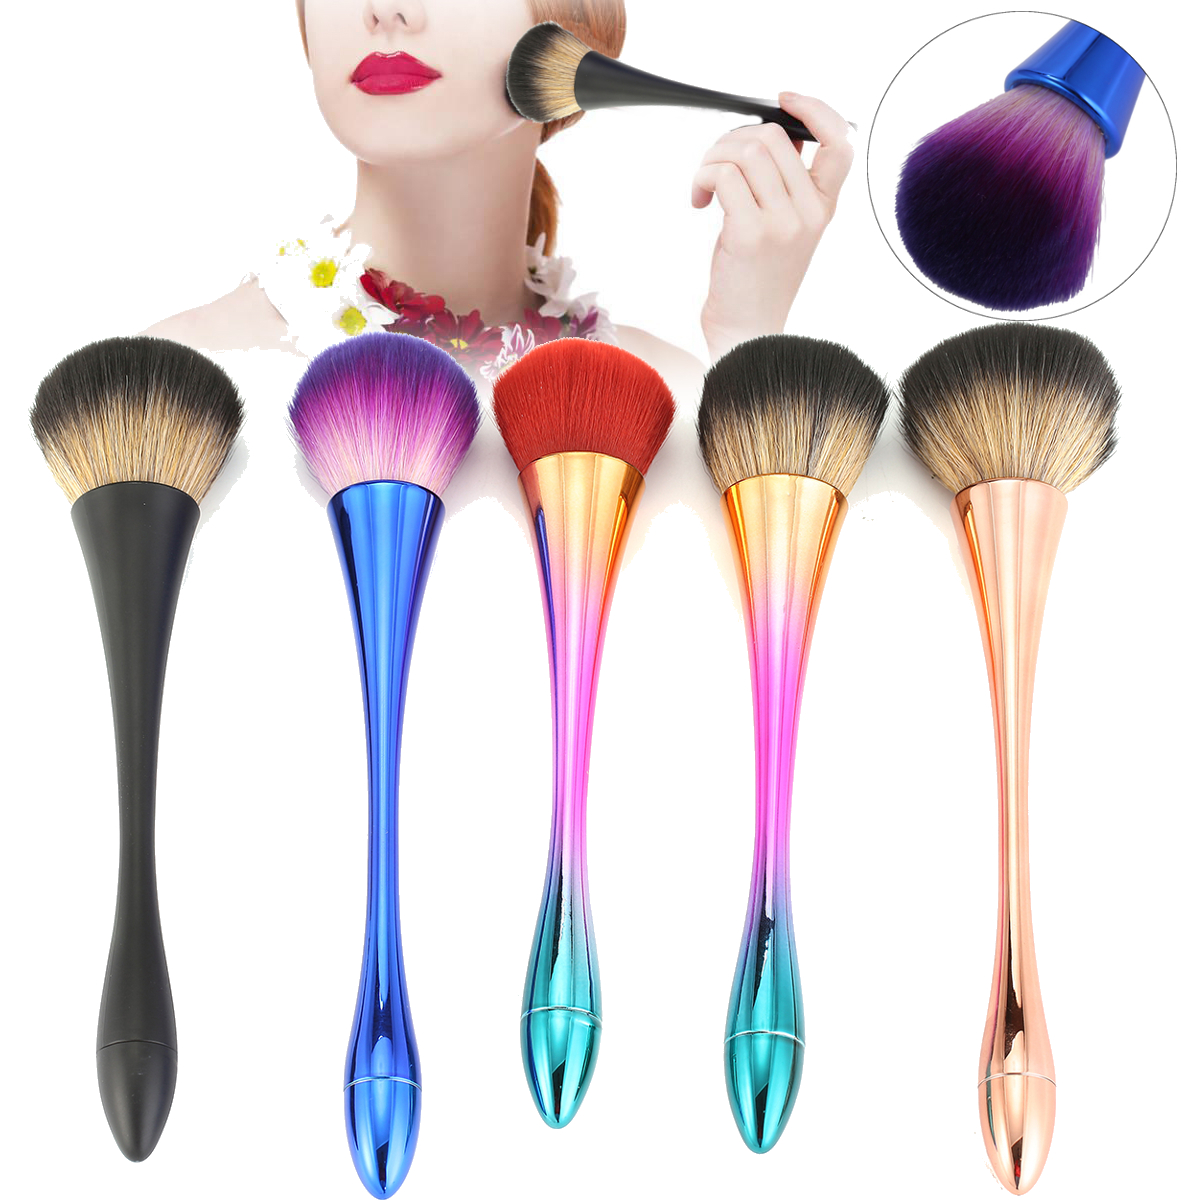 1Pc-Varied-Colorful-Face-Makeup-Brushes-Soft-Contour-Powder-Blush-Cosmetic-Founation-Brush-1334246-1